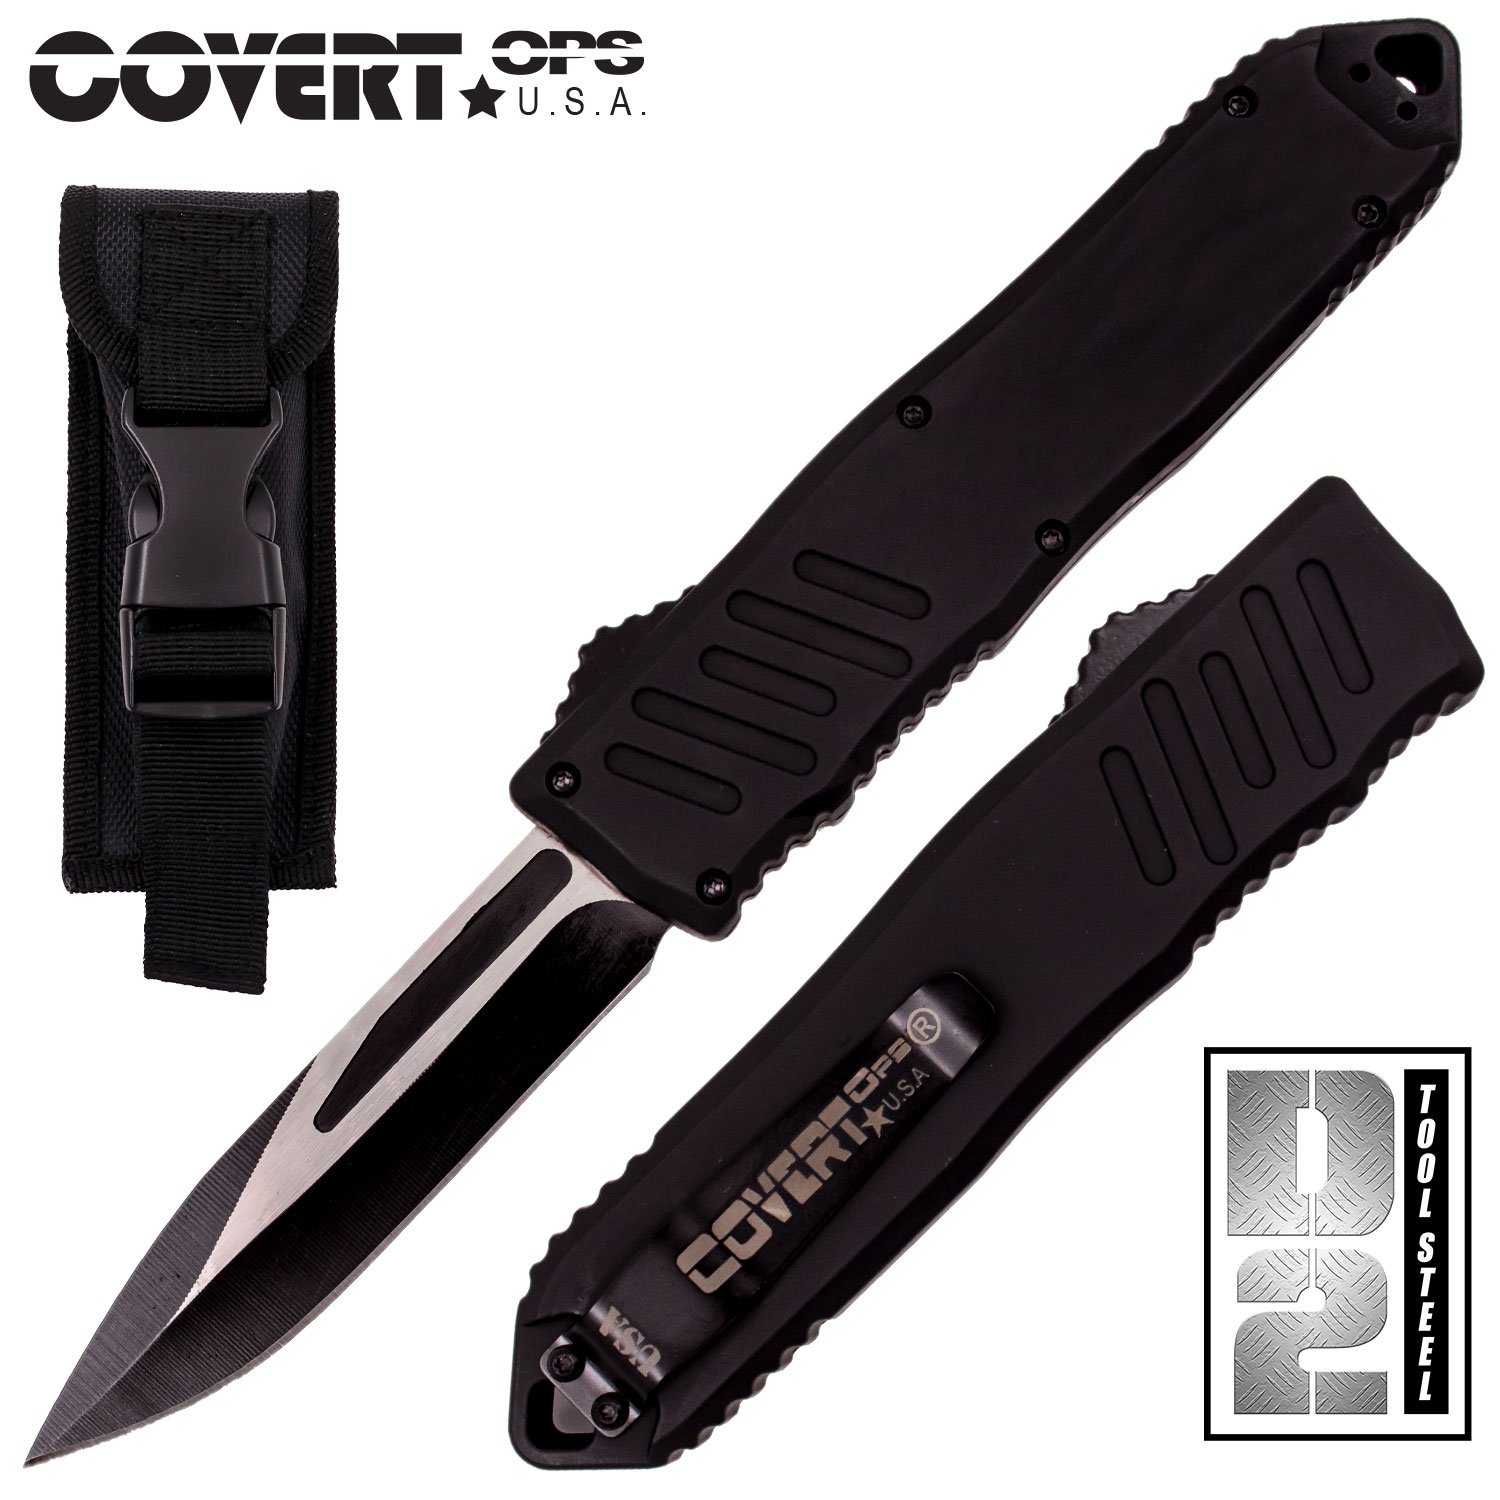 Covert OPS USA OTF Automatic Knife 9 inch Overall D2 Steel Blade DP1